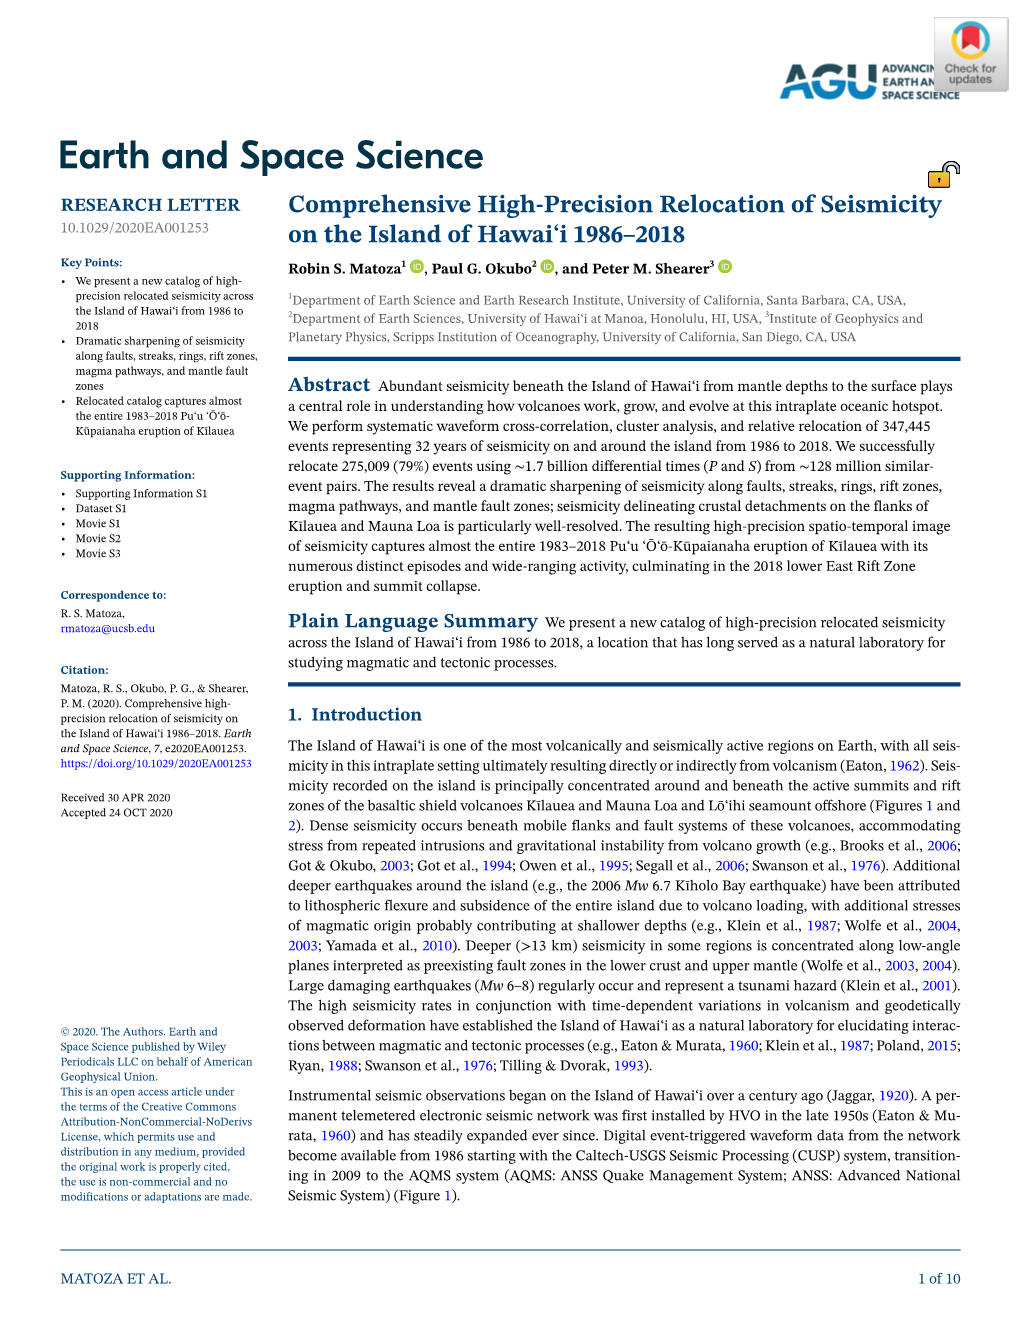 Comprehensive High‐Precision Relocation of Seismicity on The